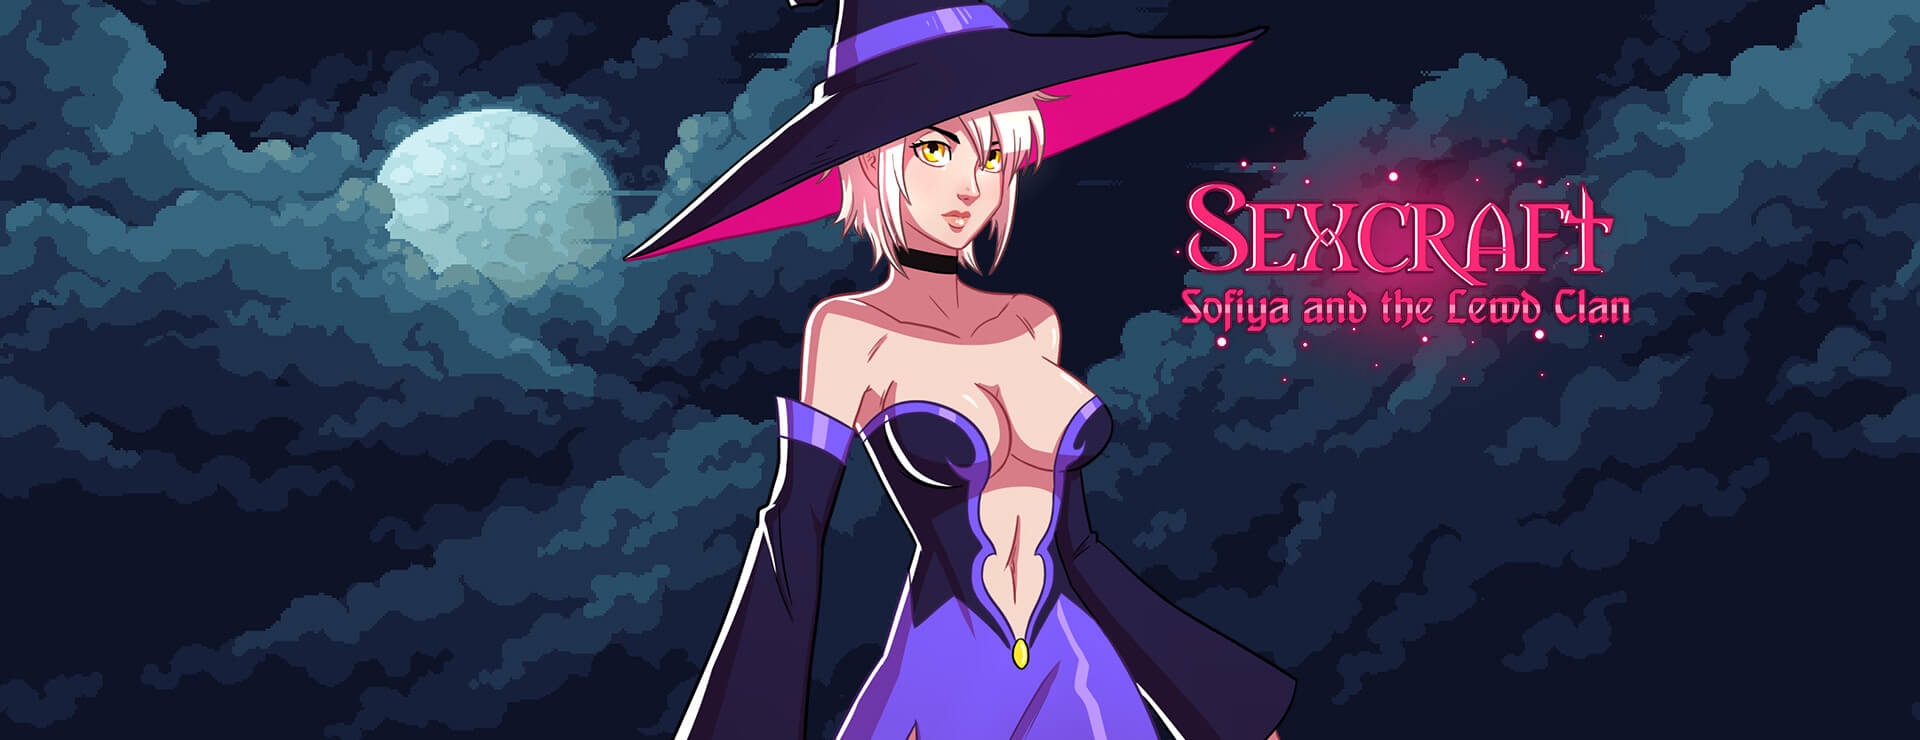 Sexcraft - Sofiya and the Lewd Clan - Action Adventure Game